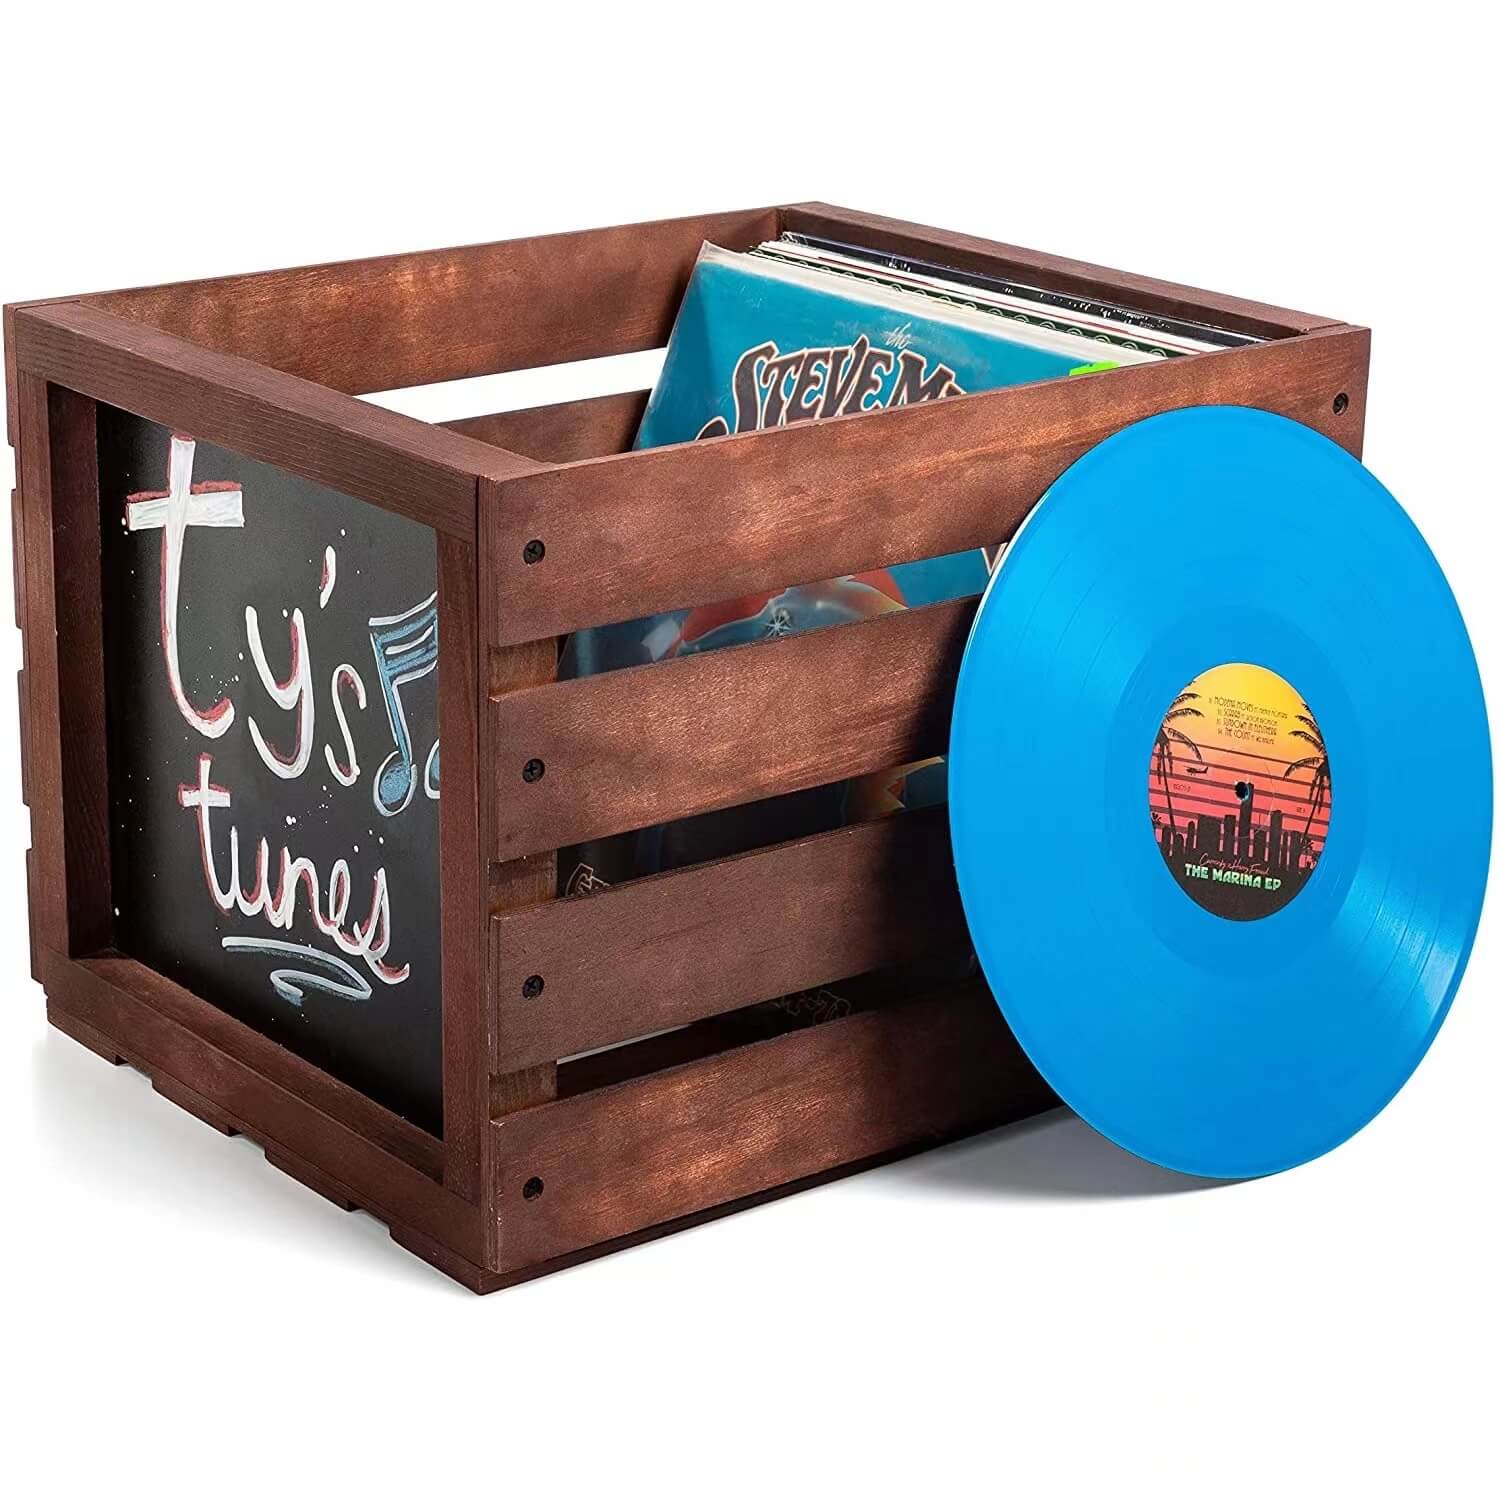 Vinyl Record Storage Create In Classic Wood Color